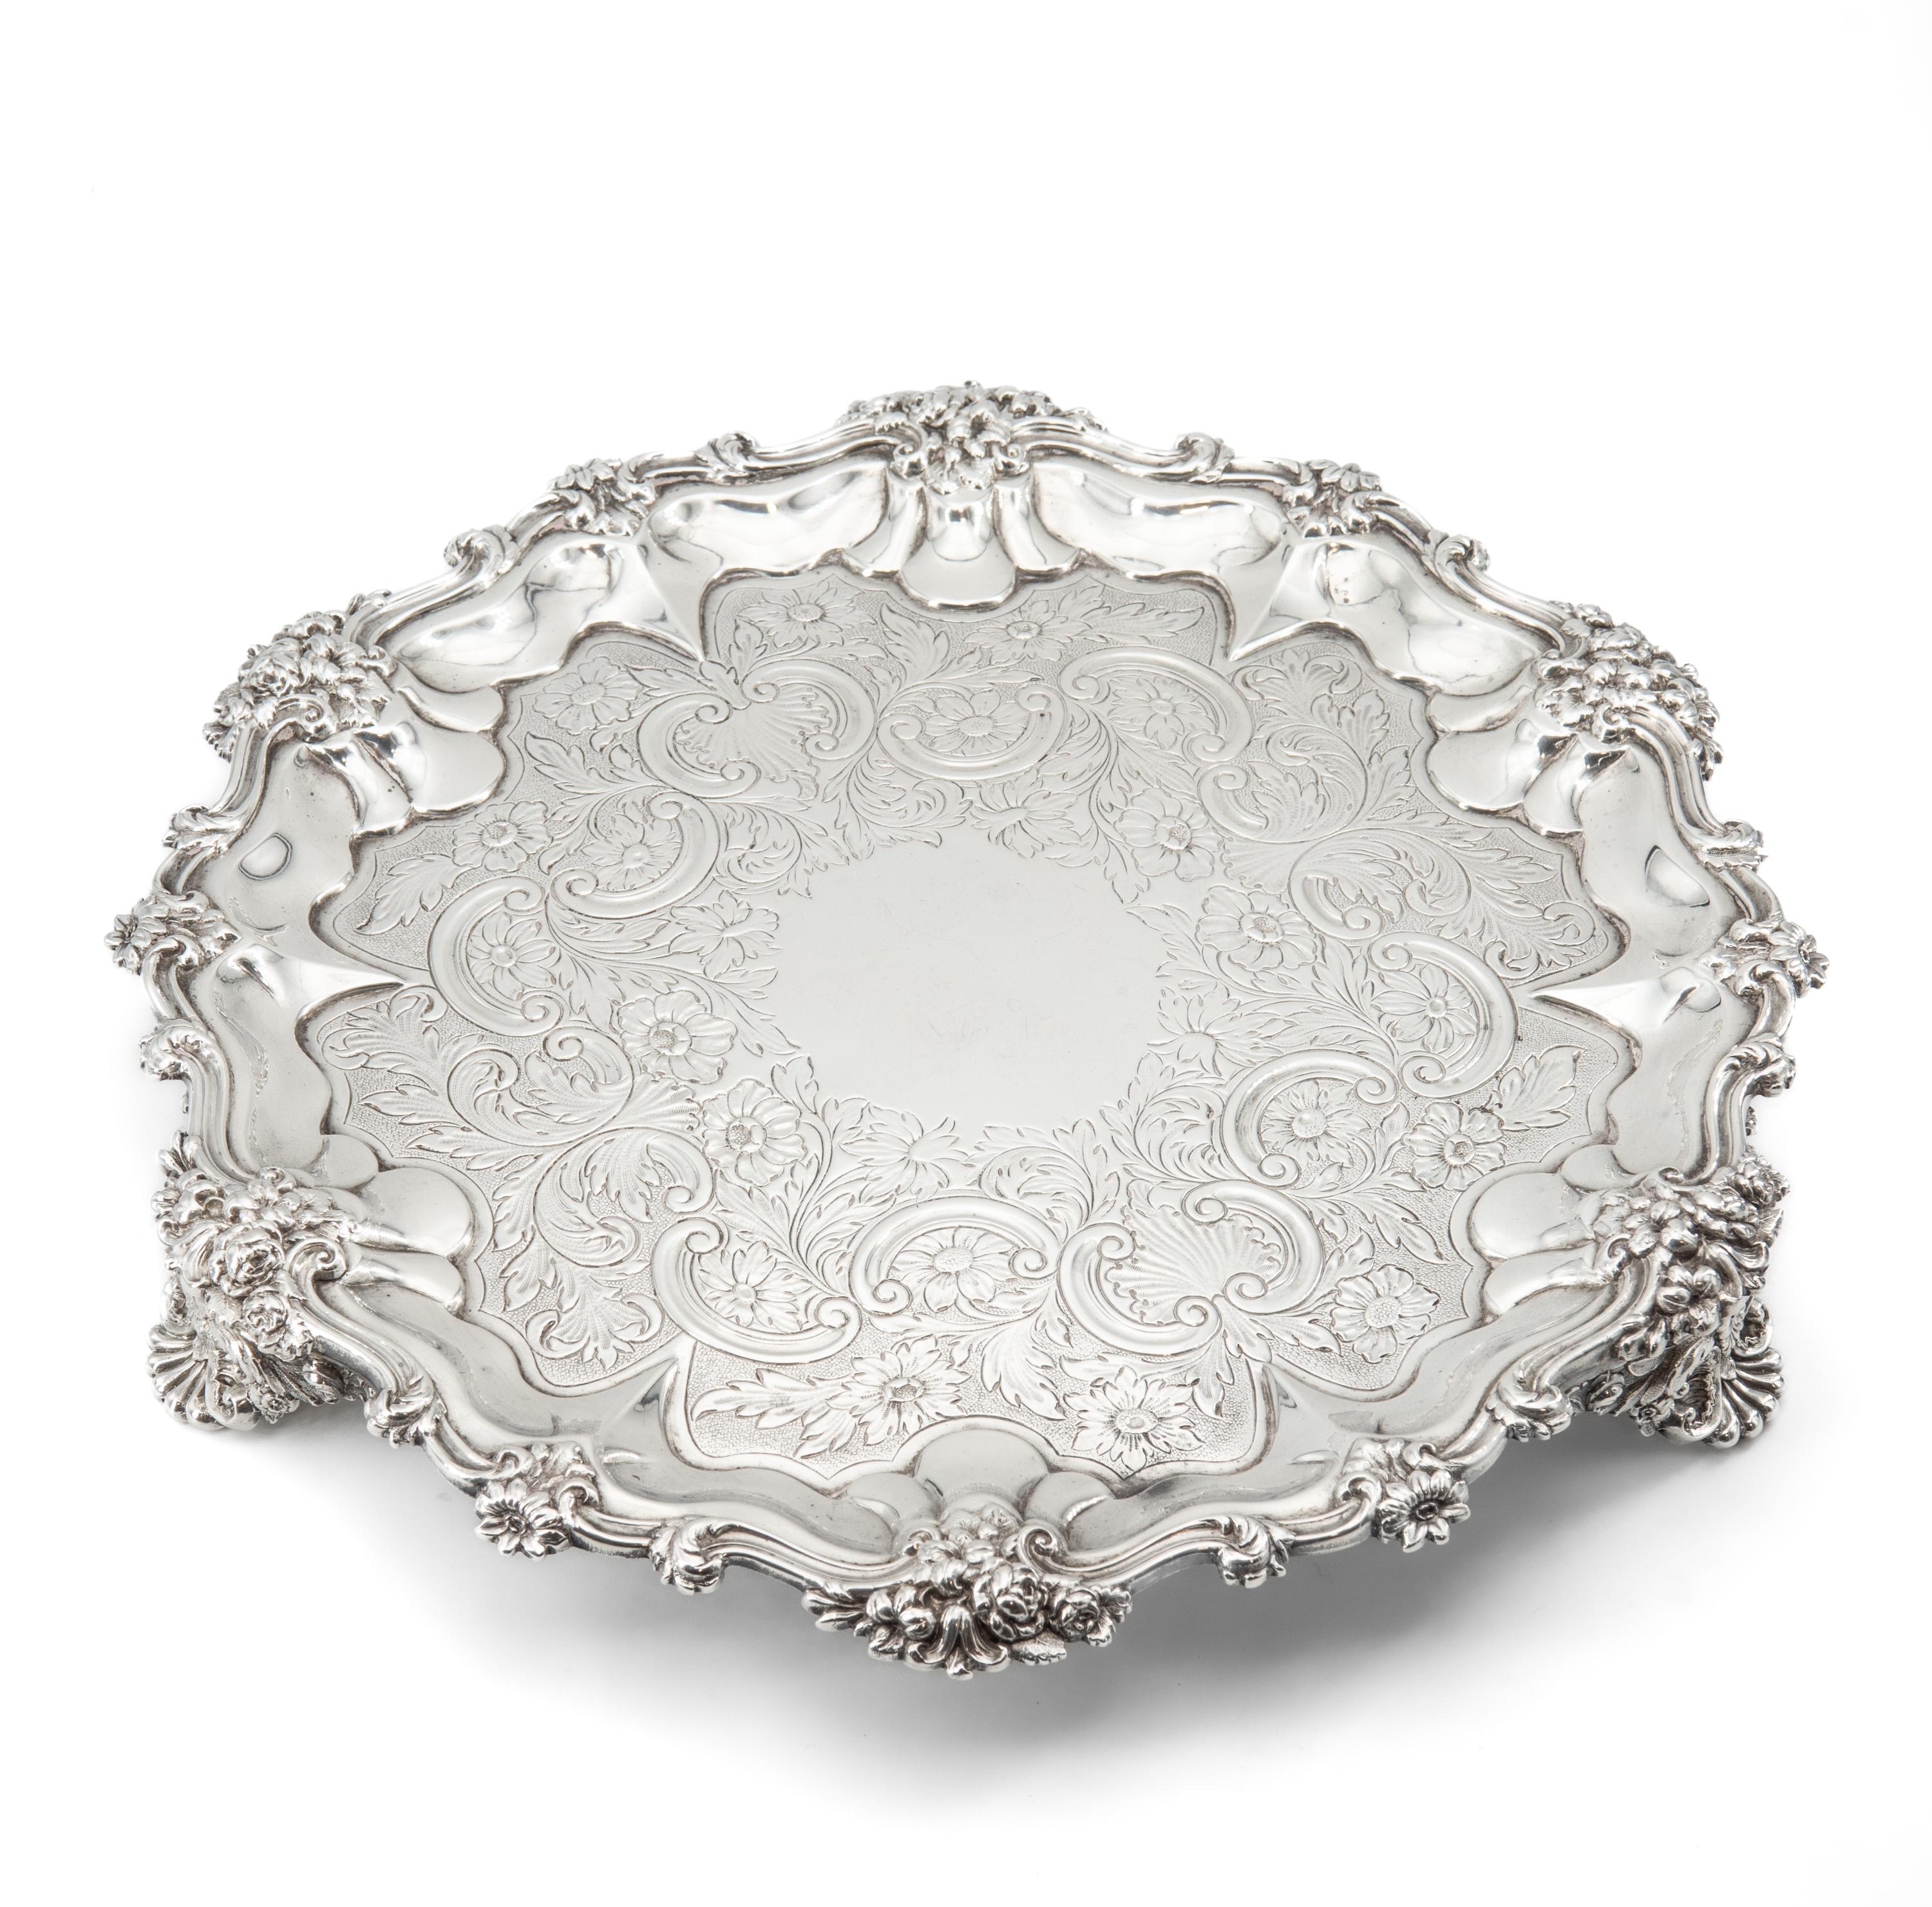 English Antique William IV Sterling Silver Flat-Chased Waiter Tray London 1831 For Sale